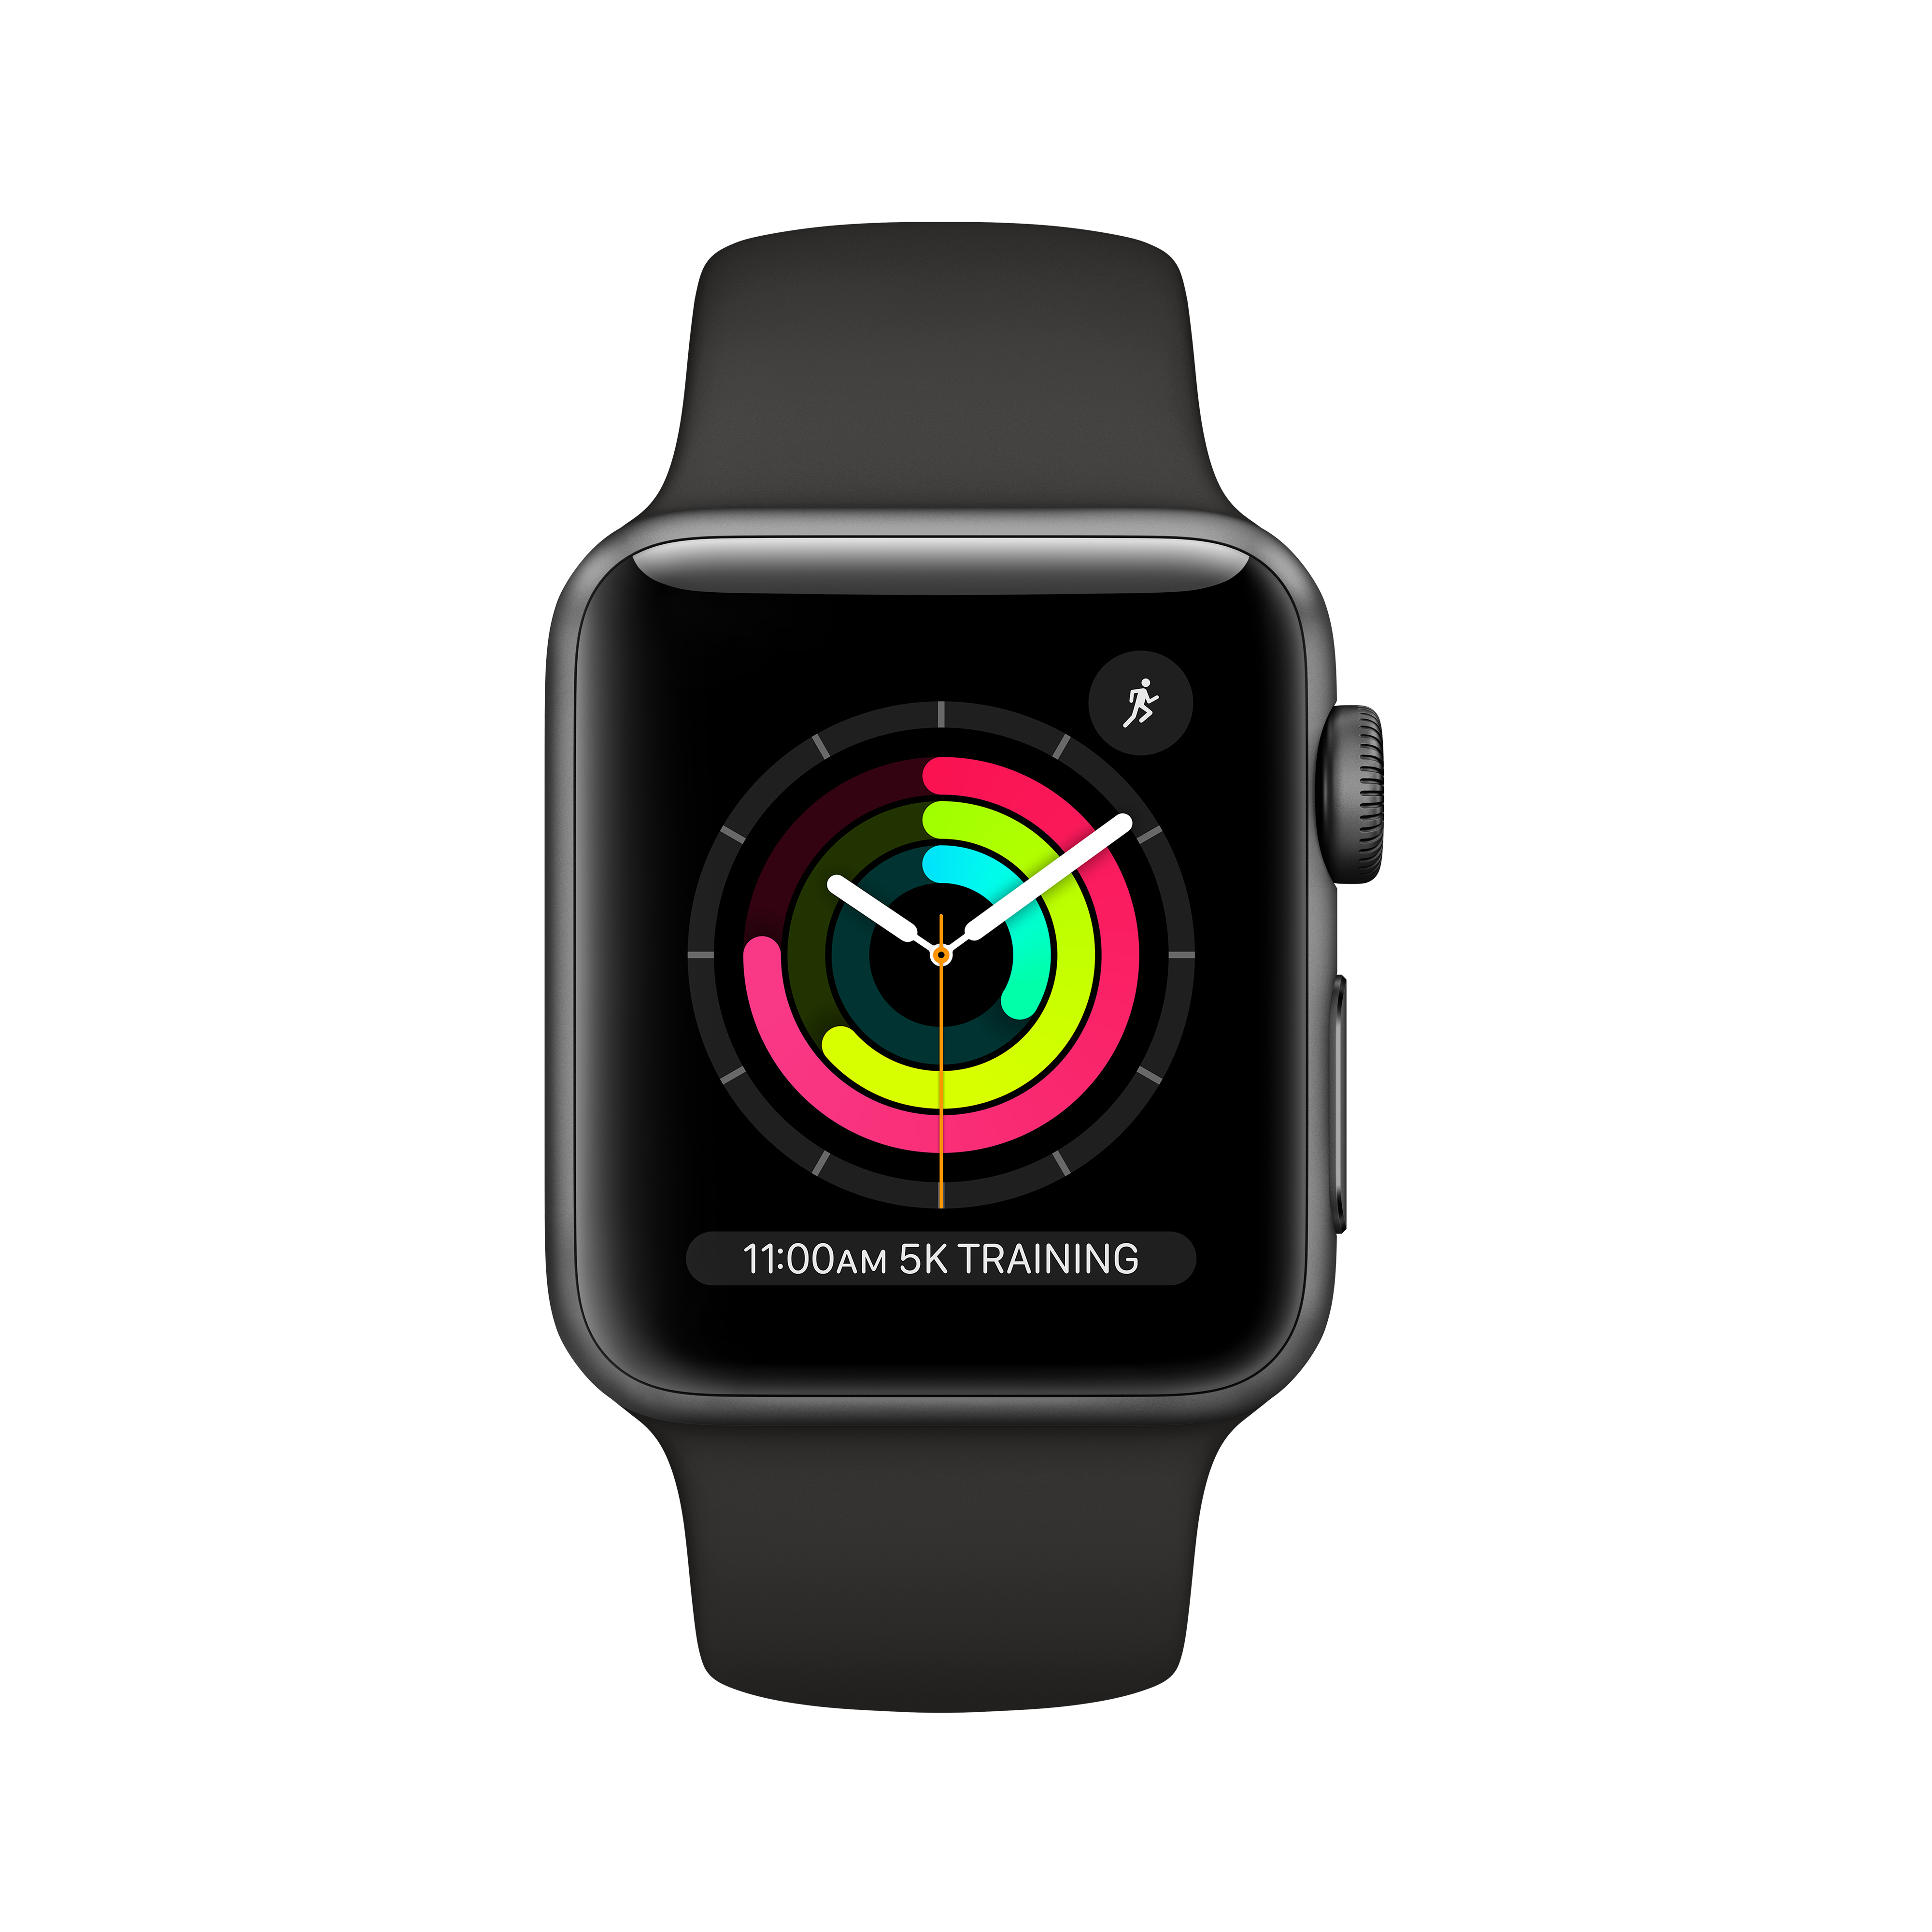 Apple Watch Series 3 GPS Space Gray - 38mm - Black Sport Band - image 6 of 6